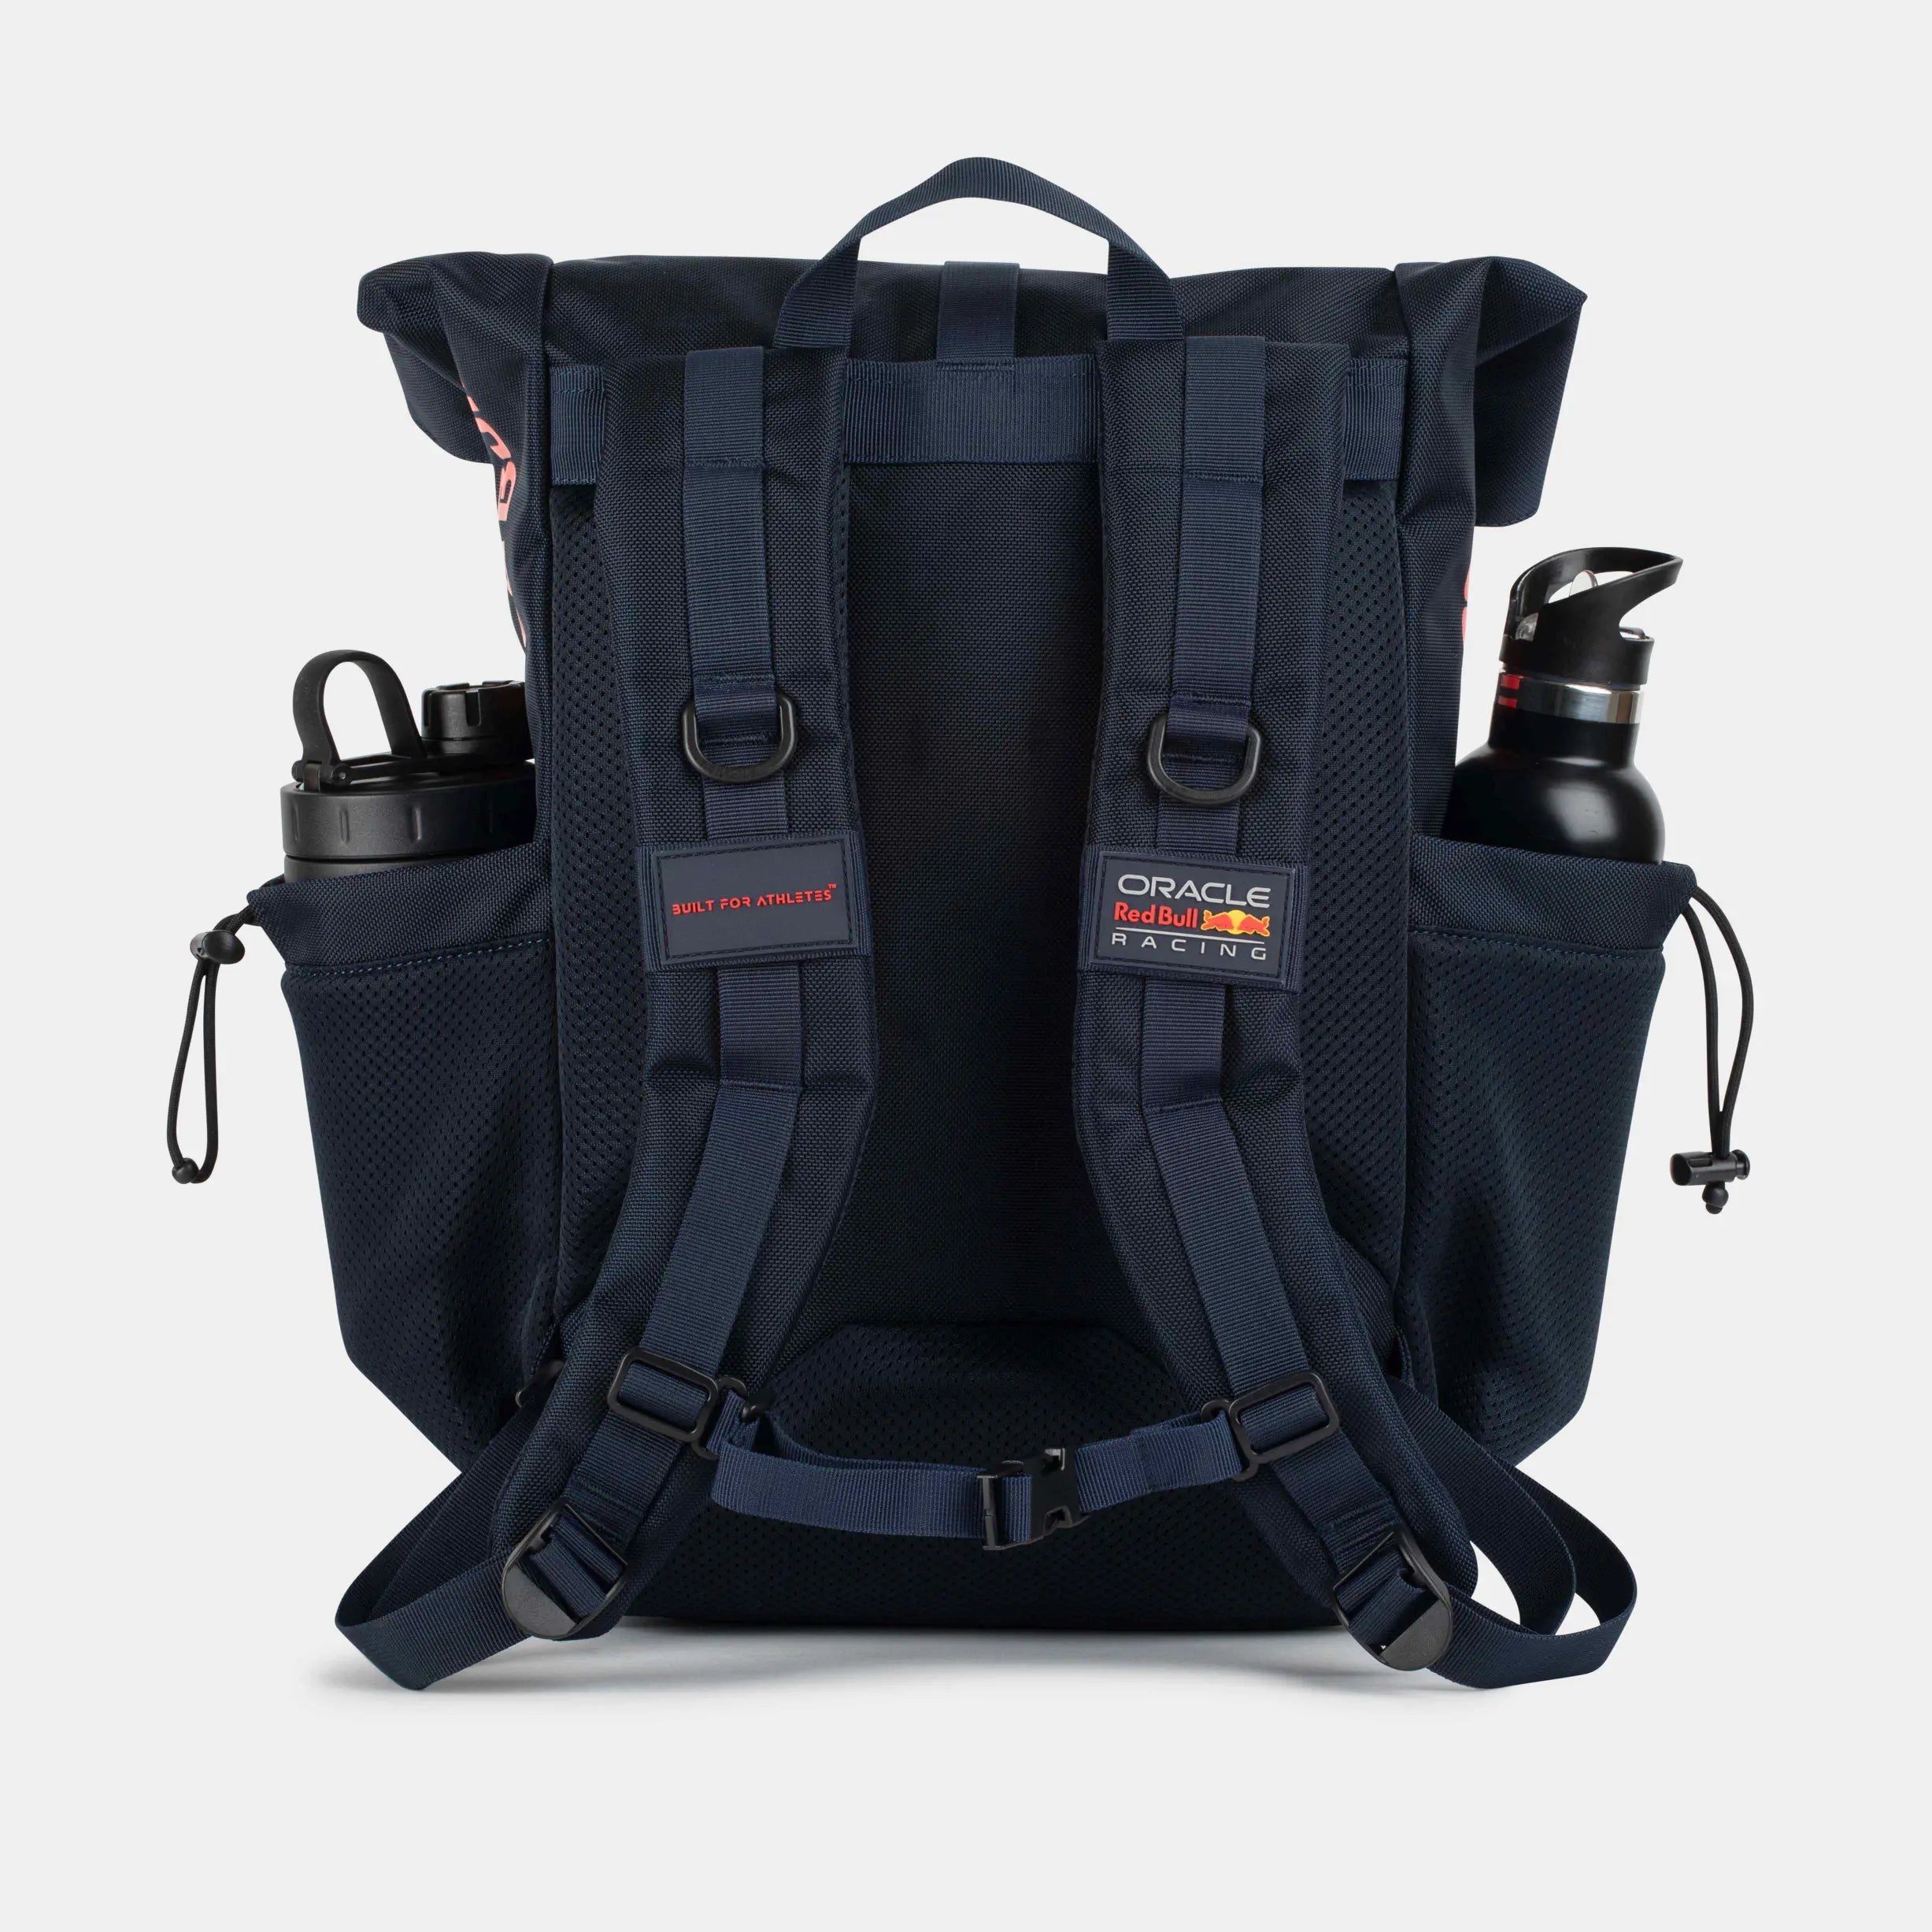 Built For Athletes Backpacks Oracle Red Bull Racing Rolltop Backpack